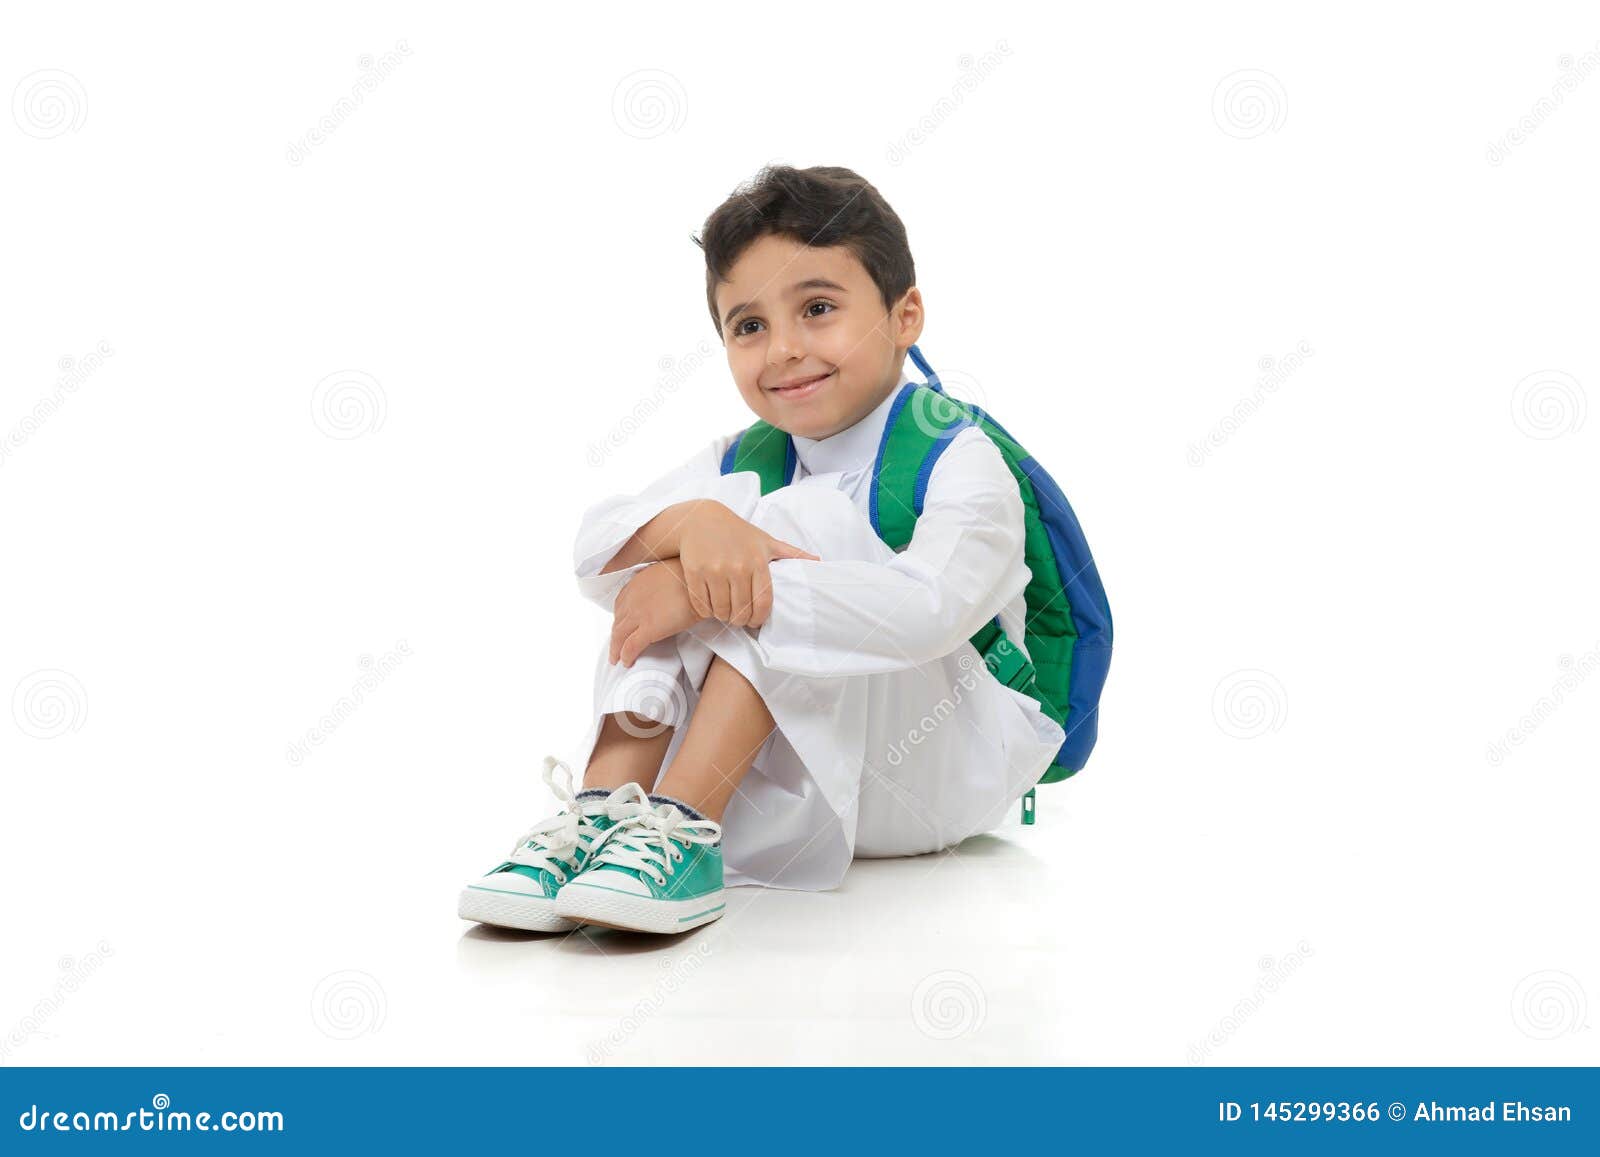 arab school boy sitting on ground with a smile on his face, wearing white traditional saudi thobe, back pack and sneakers, raising